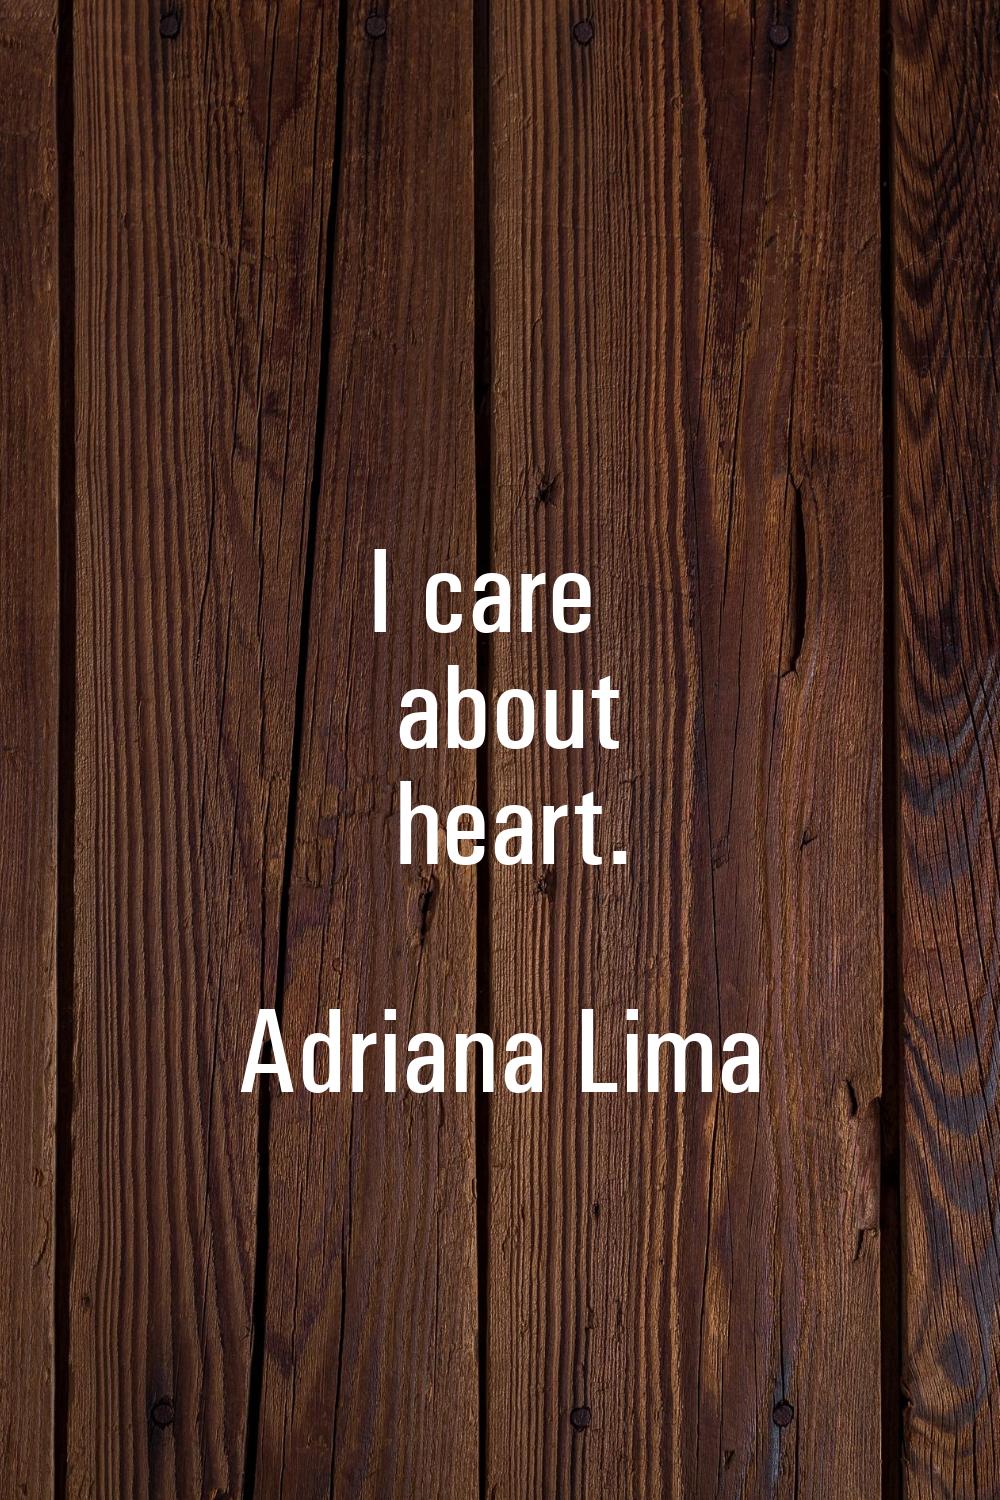 I care about heart.